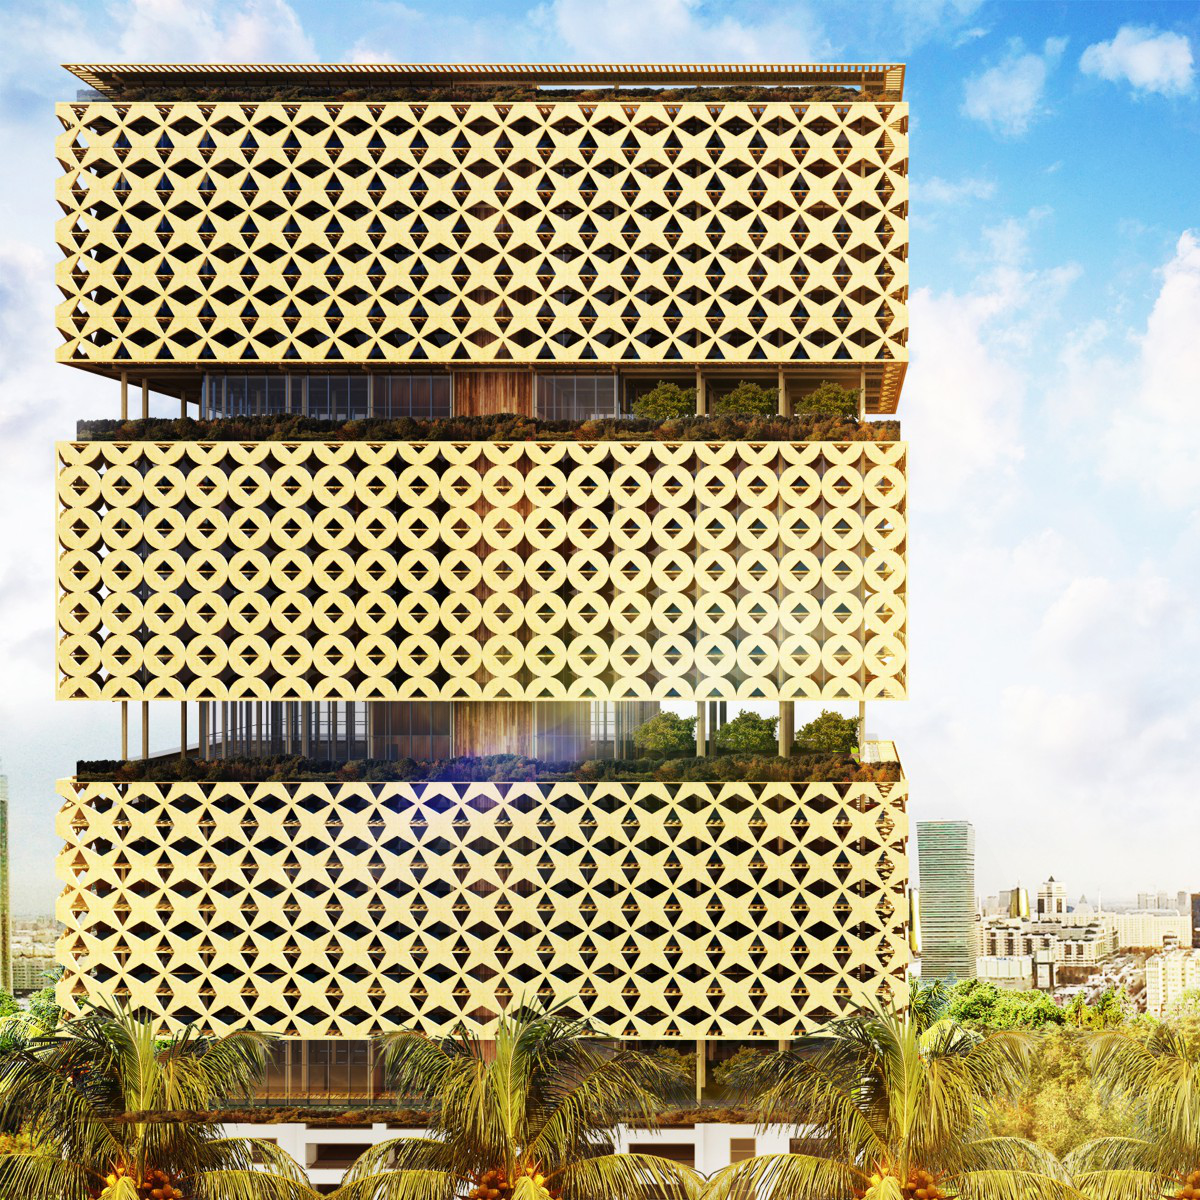 Lagos's Wooden Tower Residential Building by Hermann Kamte